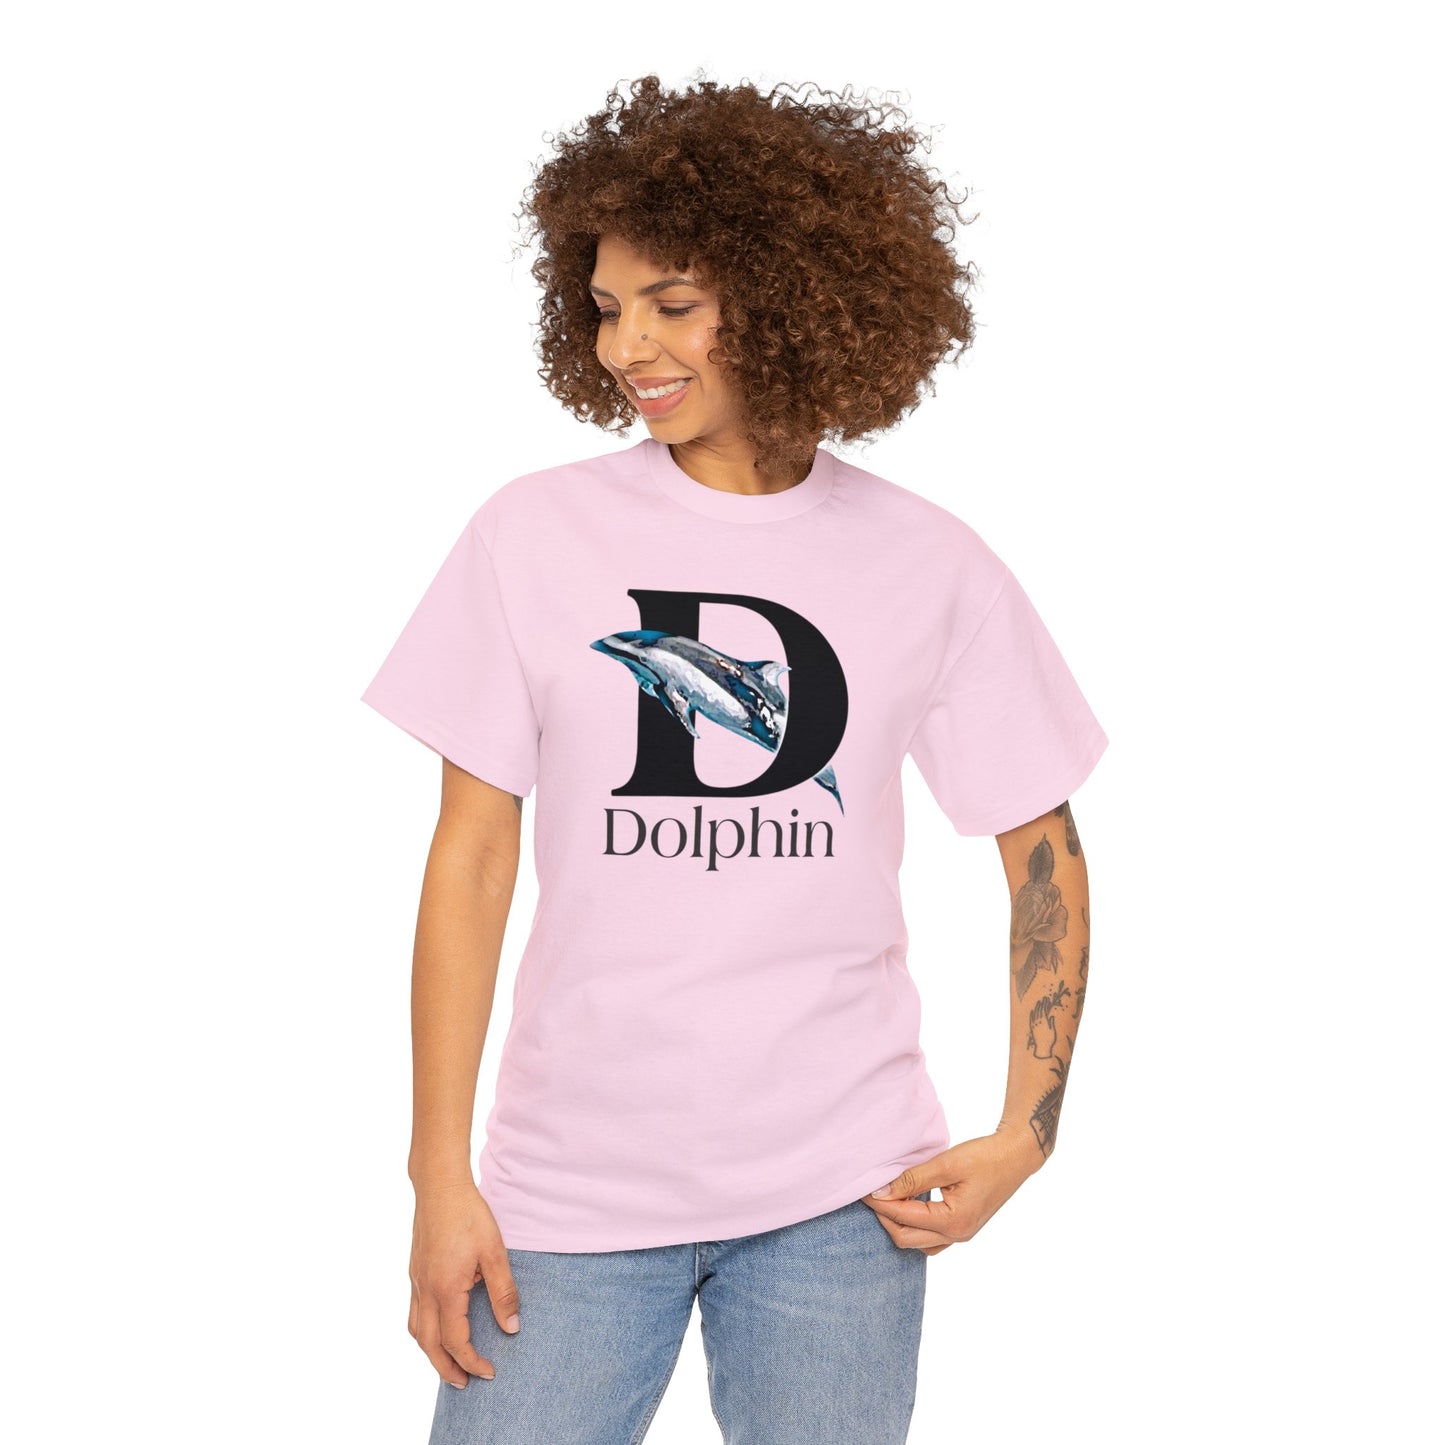 D is for Dolphin T-Shirt, Dolphin Drawing T-Shirt, Dolphin Lovers shirt, Dolphin illustration